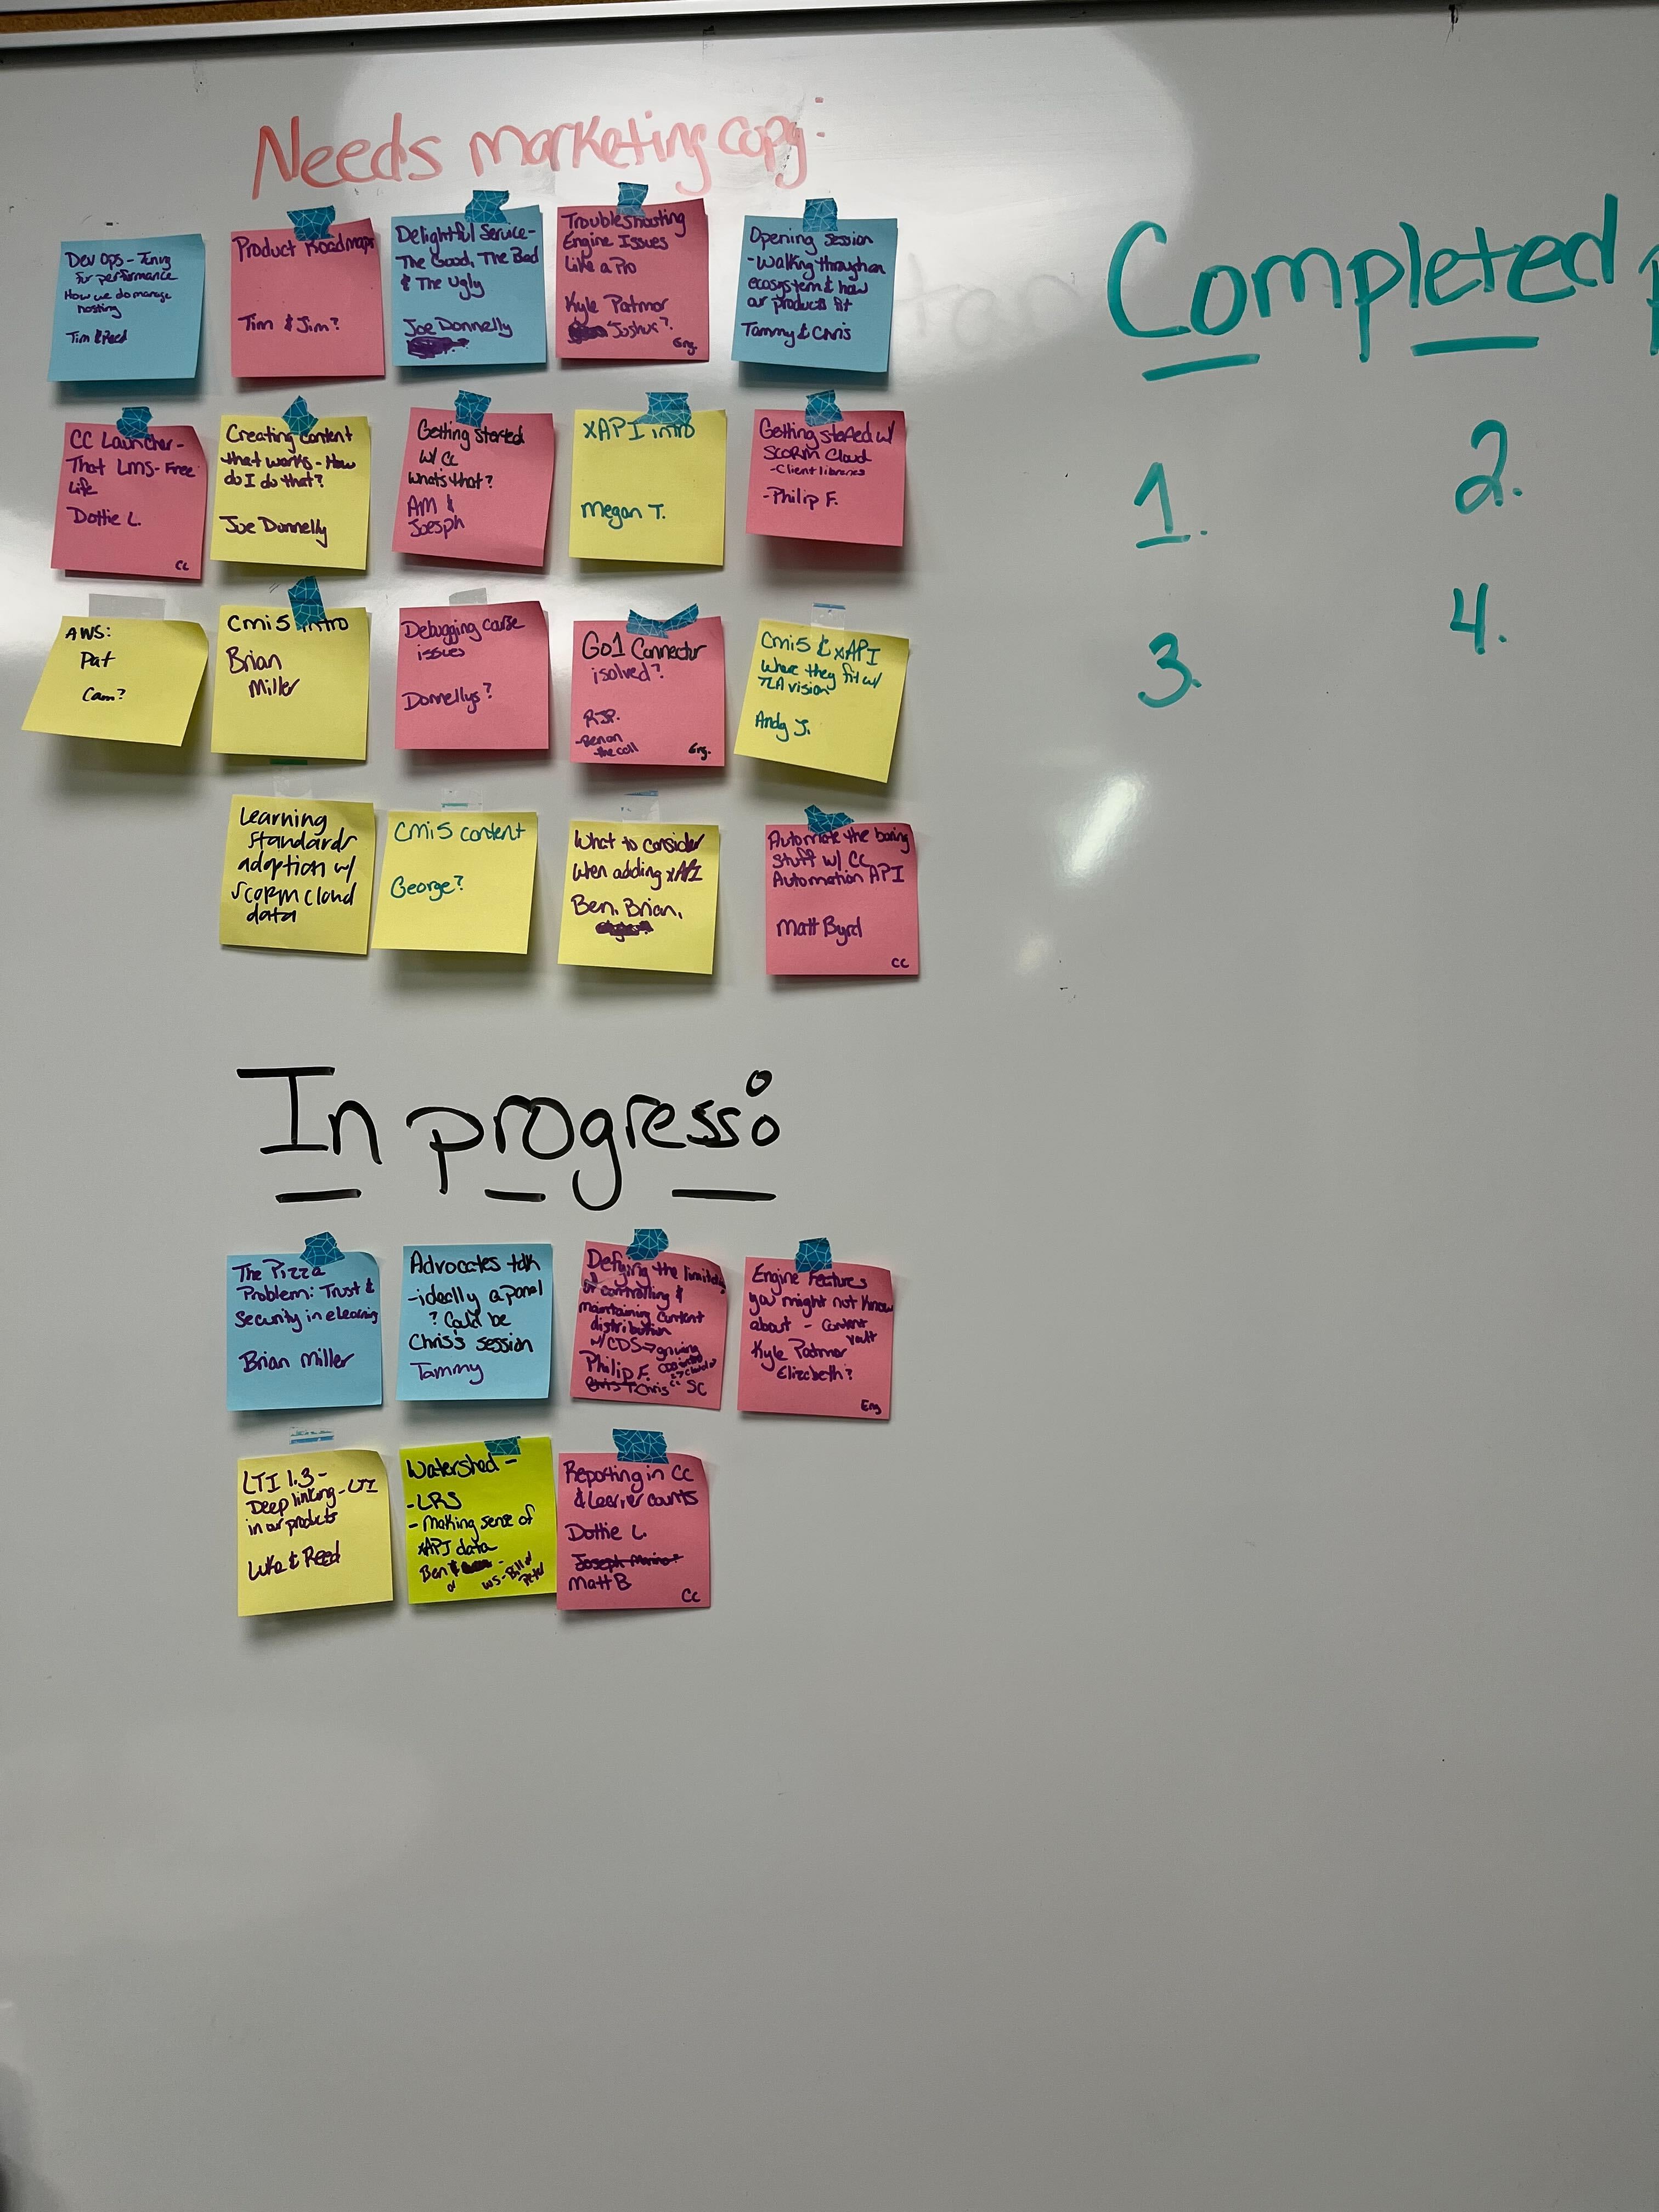 Planning whiteboard with sticky notes